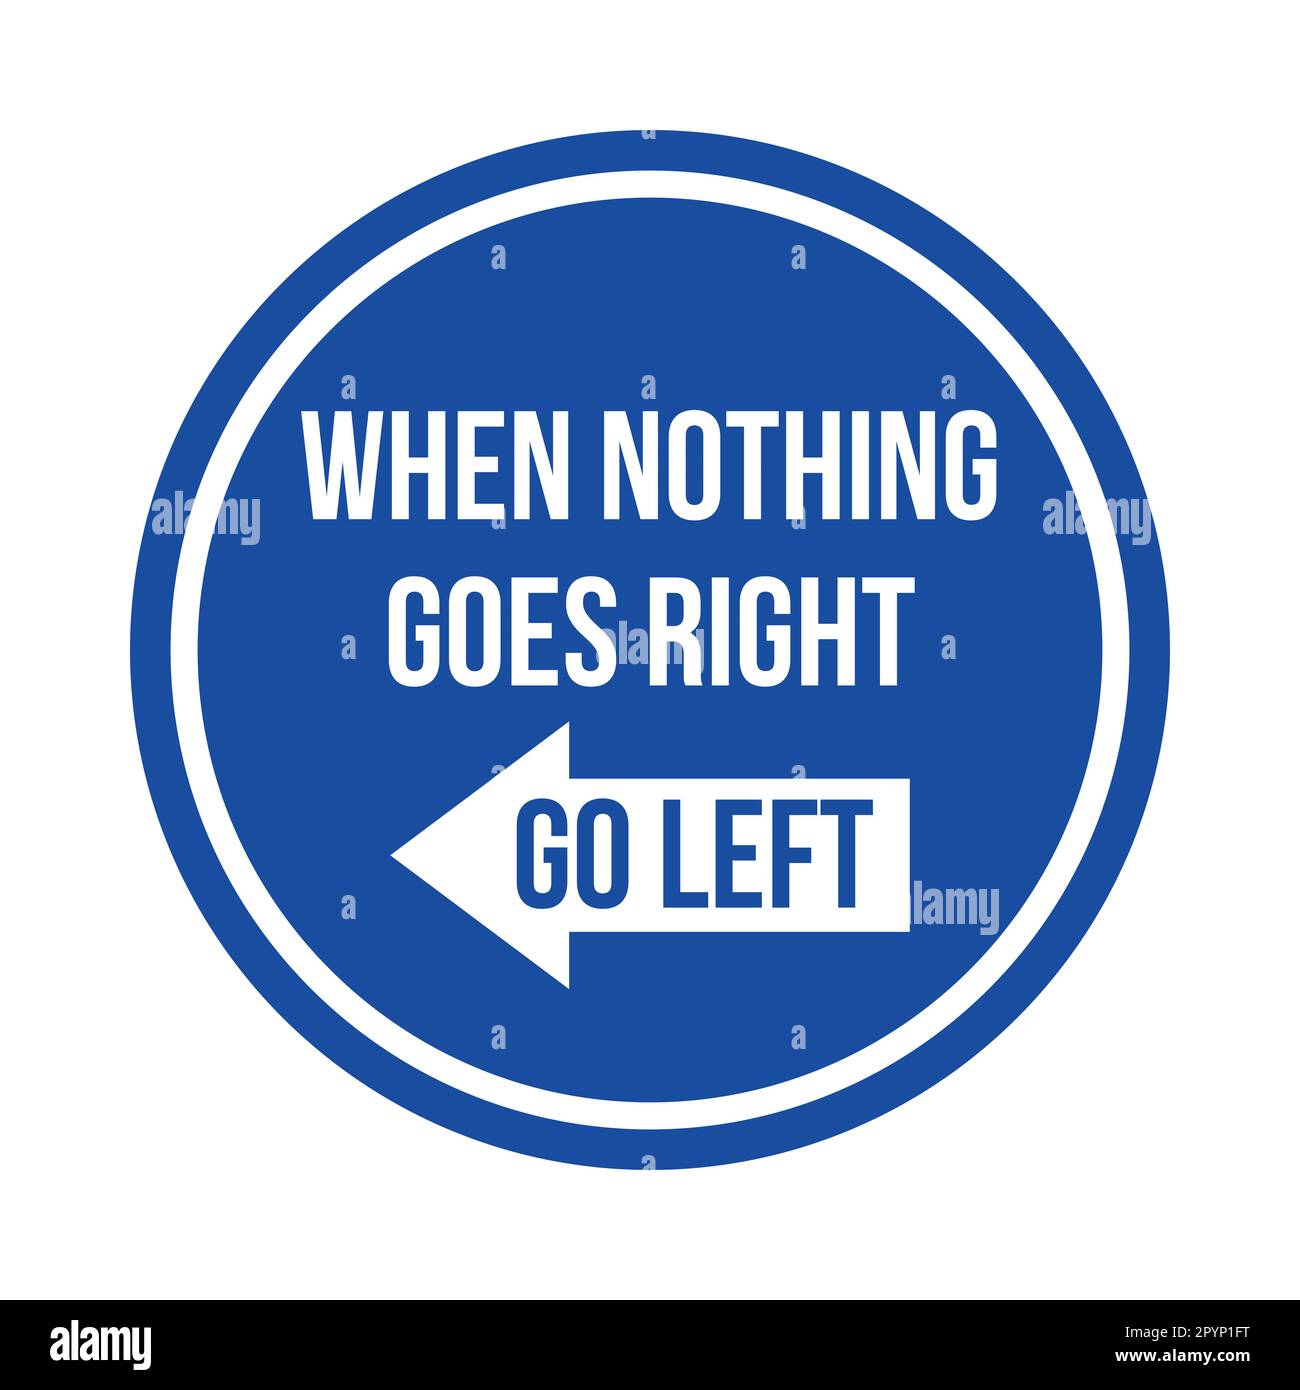 When nothing goes right goes left symbol icon Stock Photo